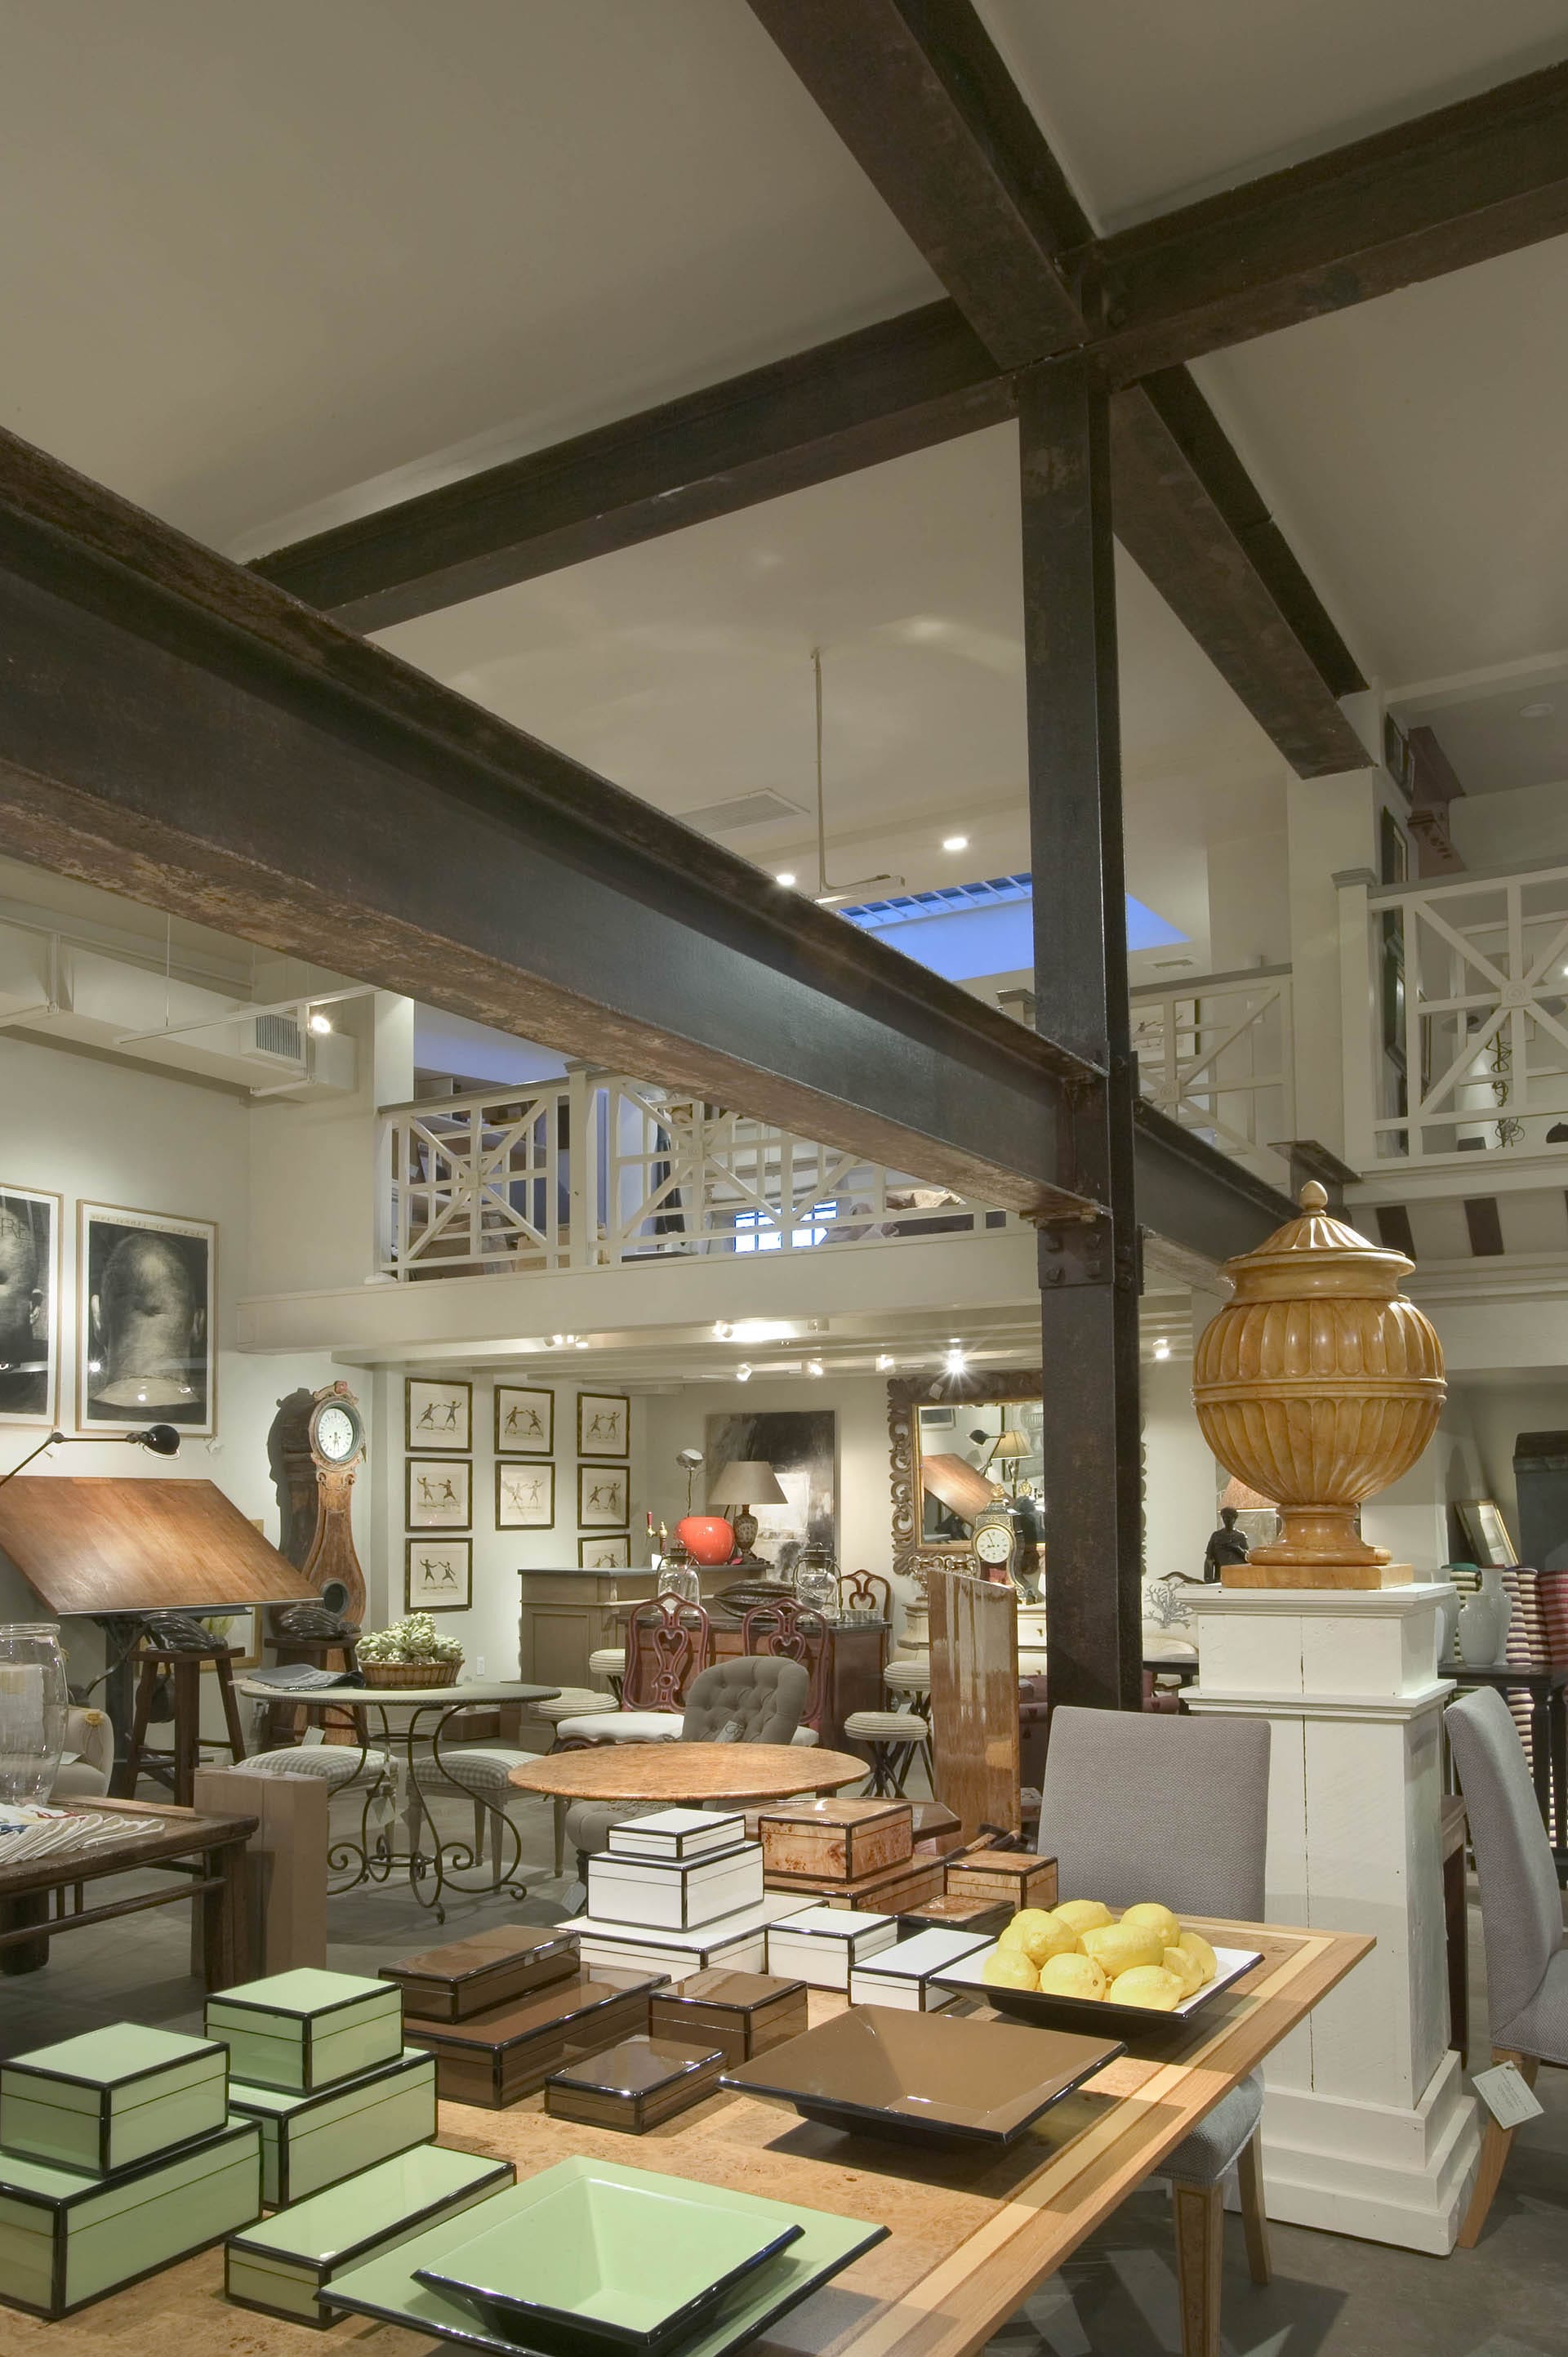 Aged metal beams used for aesthetics and support create an X on the ceiling of an antique store stocked with merchandise.